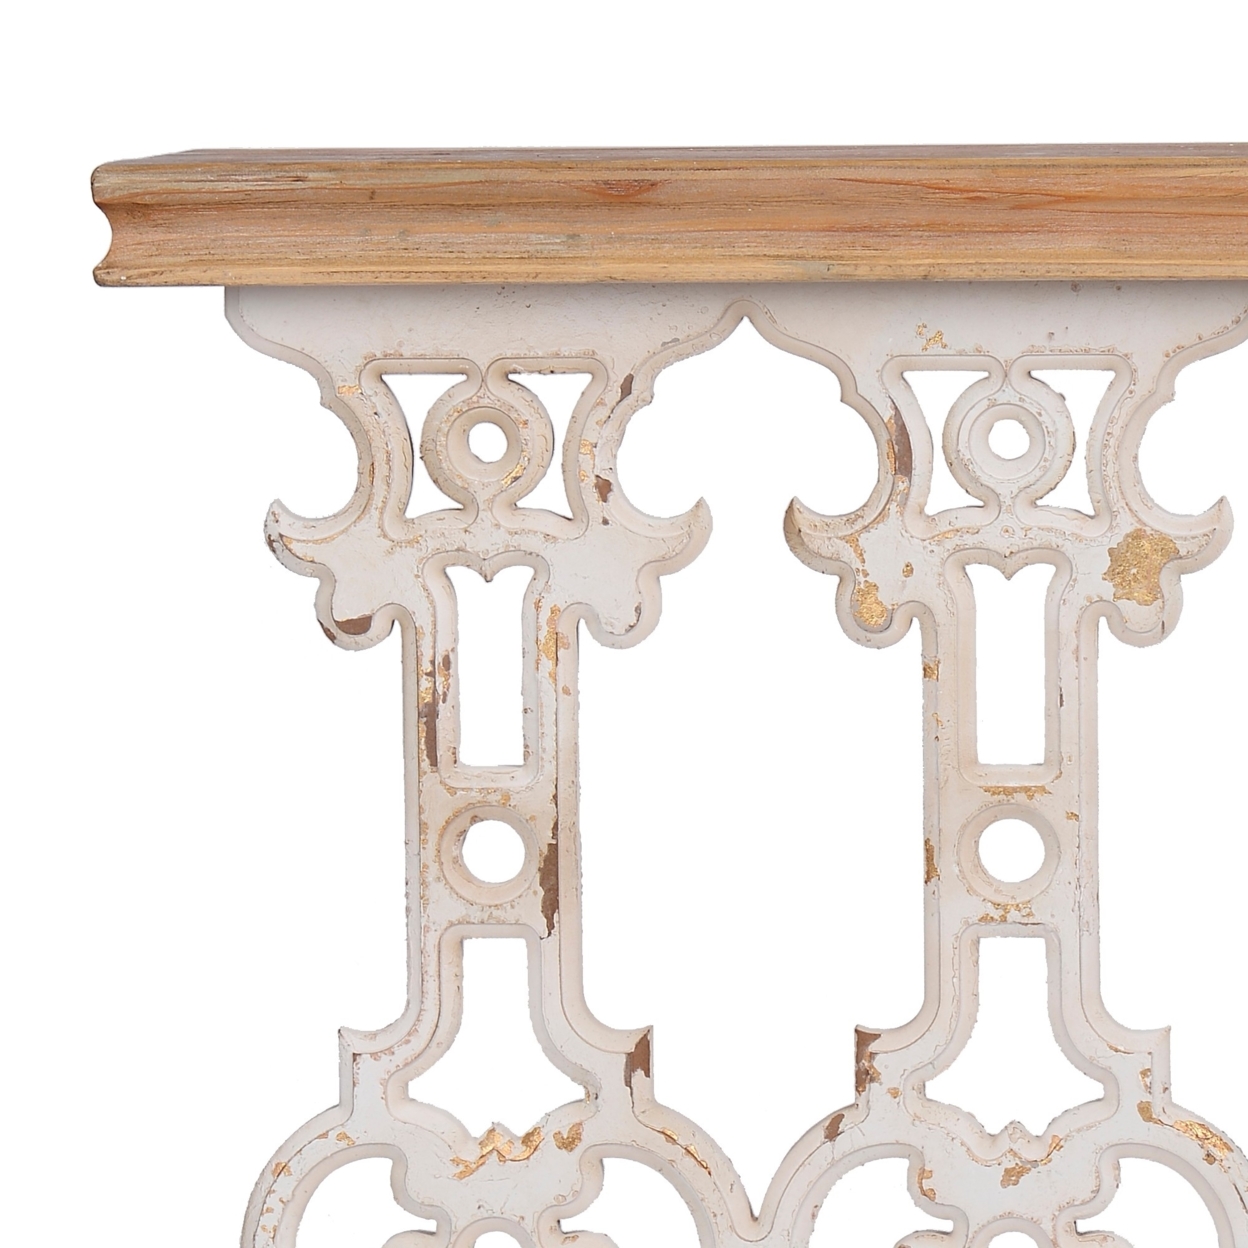 32 Inch Console Table, Fir Wood, Traditional, Scrollwork, Antique White, Saltoro Sherpi